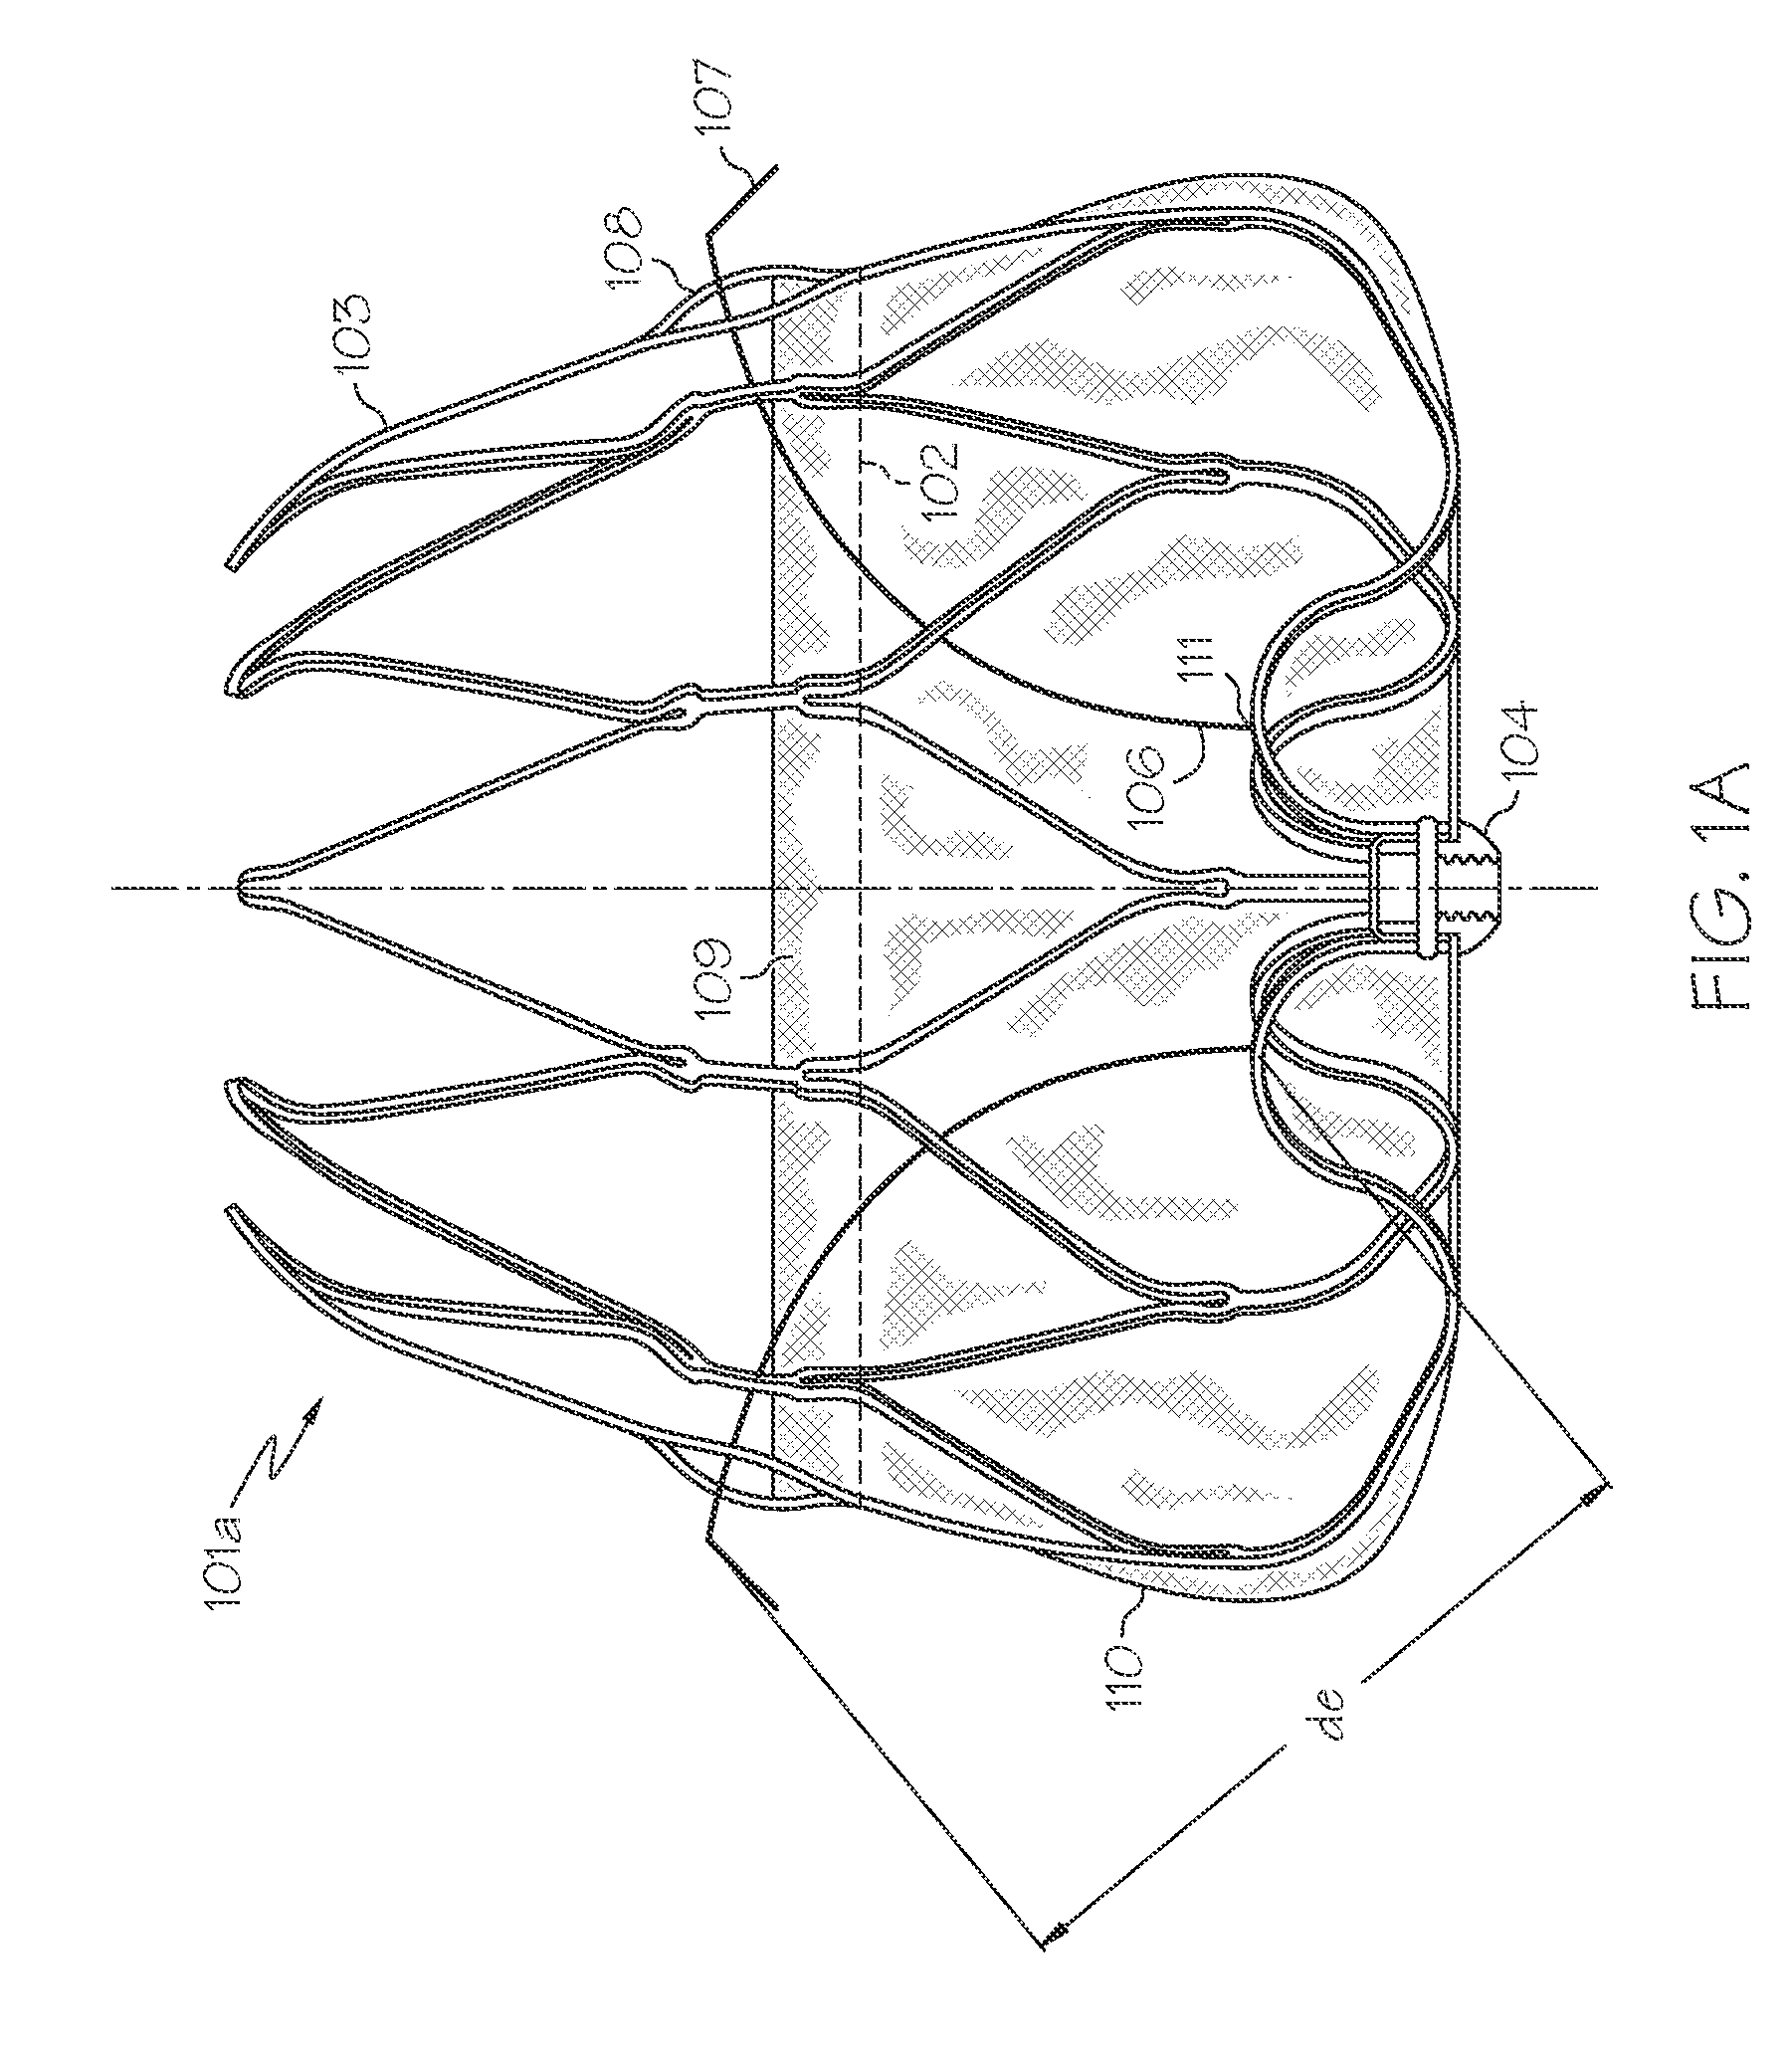 Fixation Anchor Design for an Occlusion Device